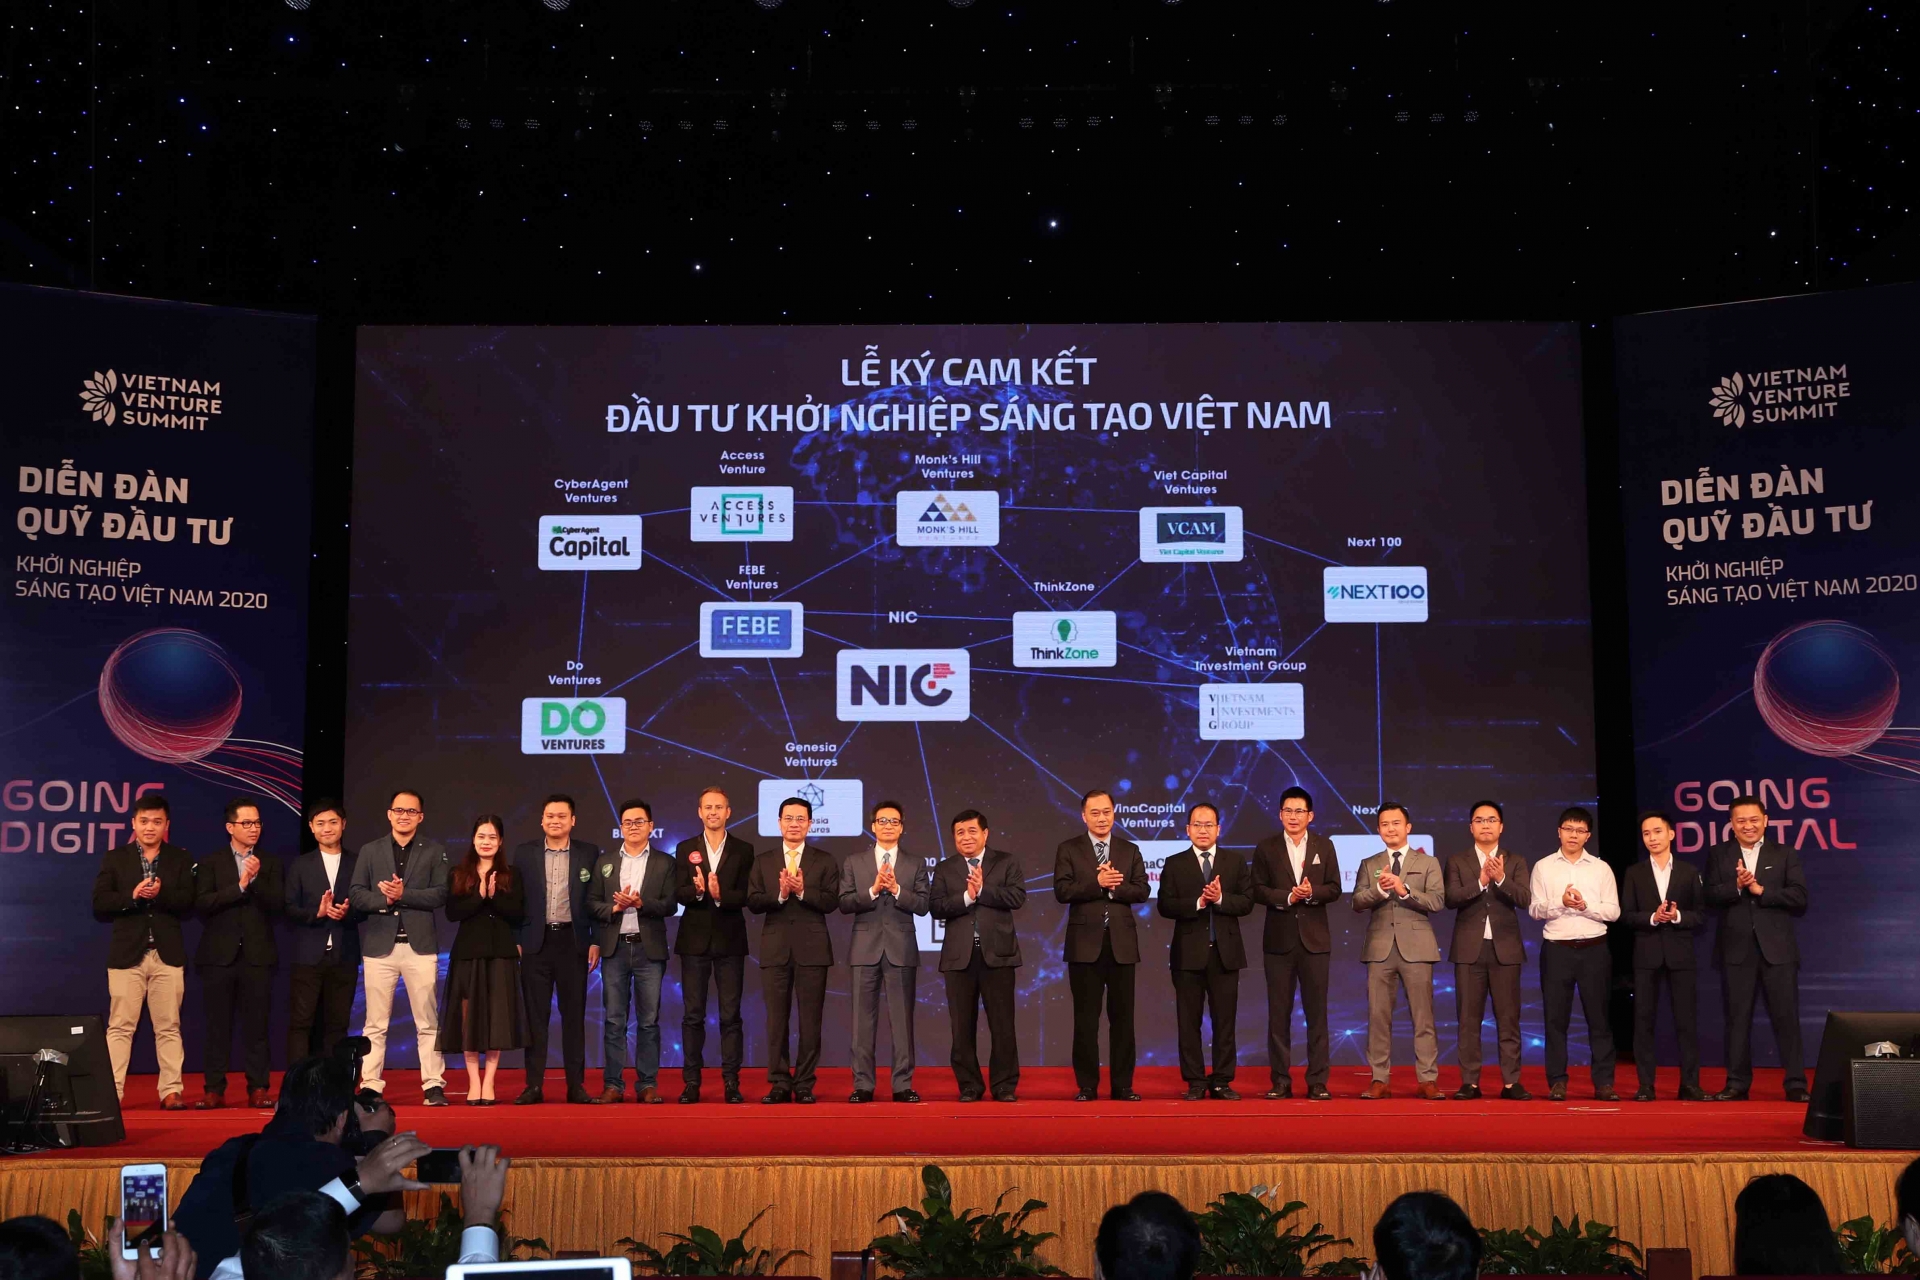 815 million ready for vietnamese startup projects